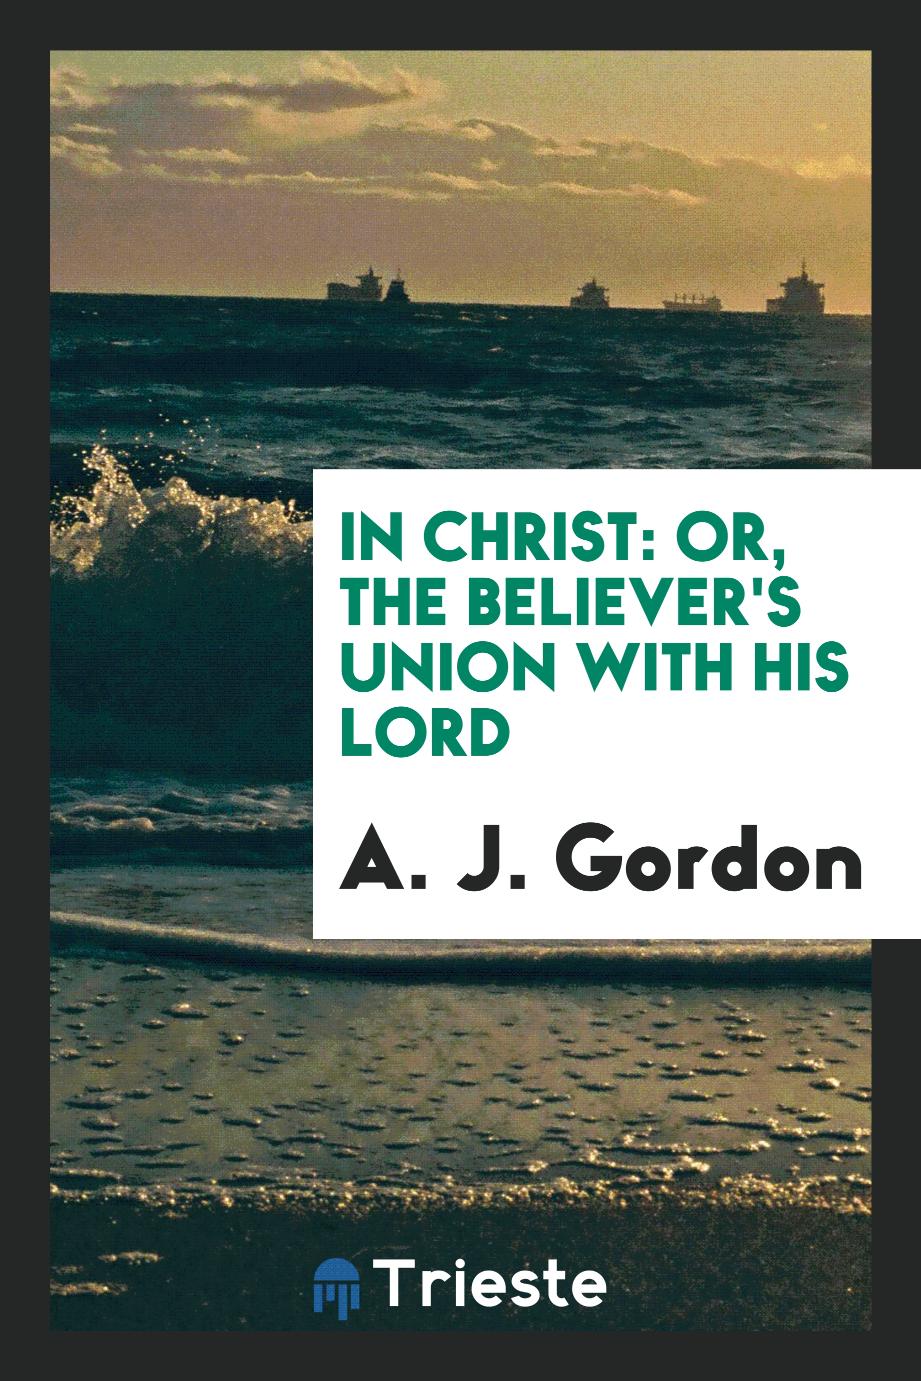 In Christ: Or, The Believer's Union with His Lord